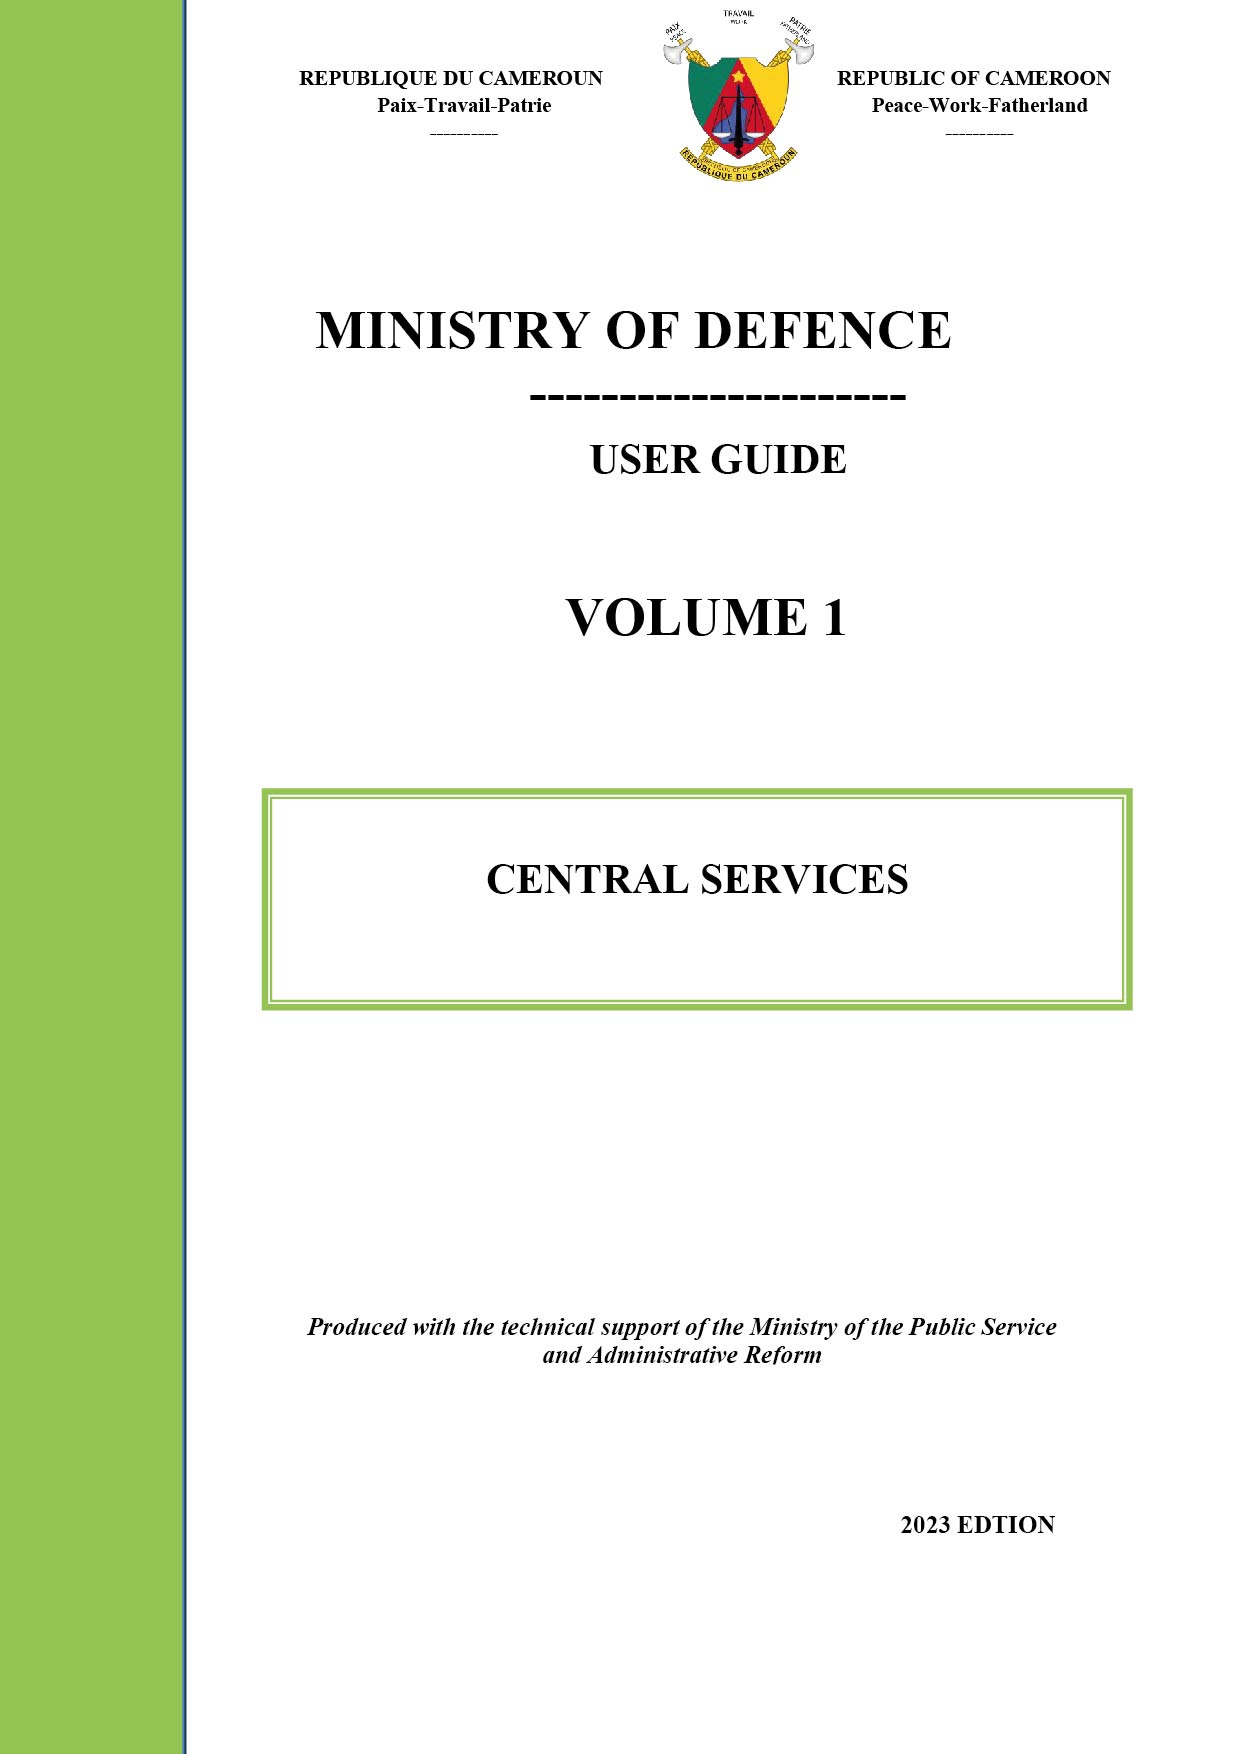 USER GUIDE CENTRAL SERVICES VOLUME 1